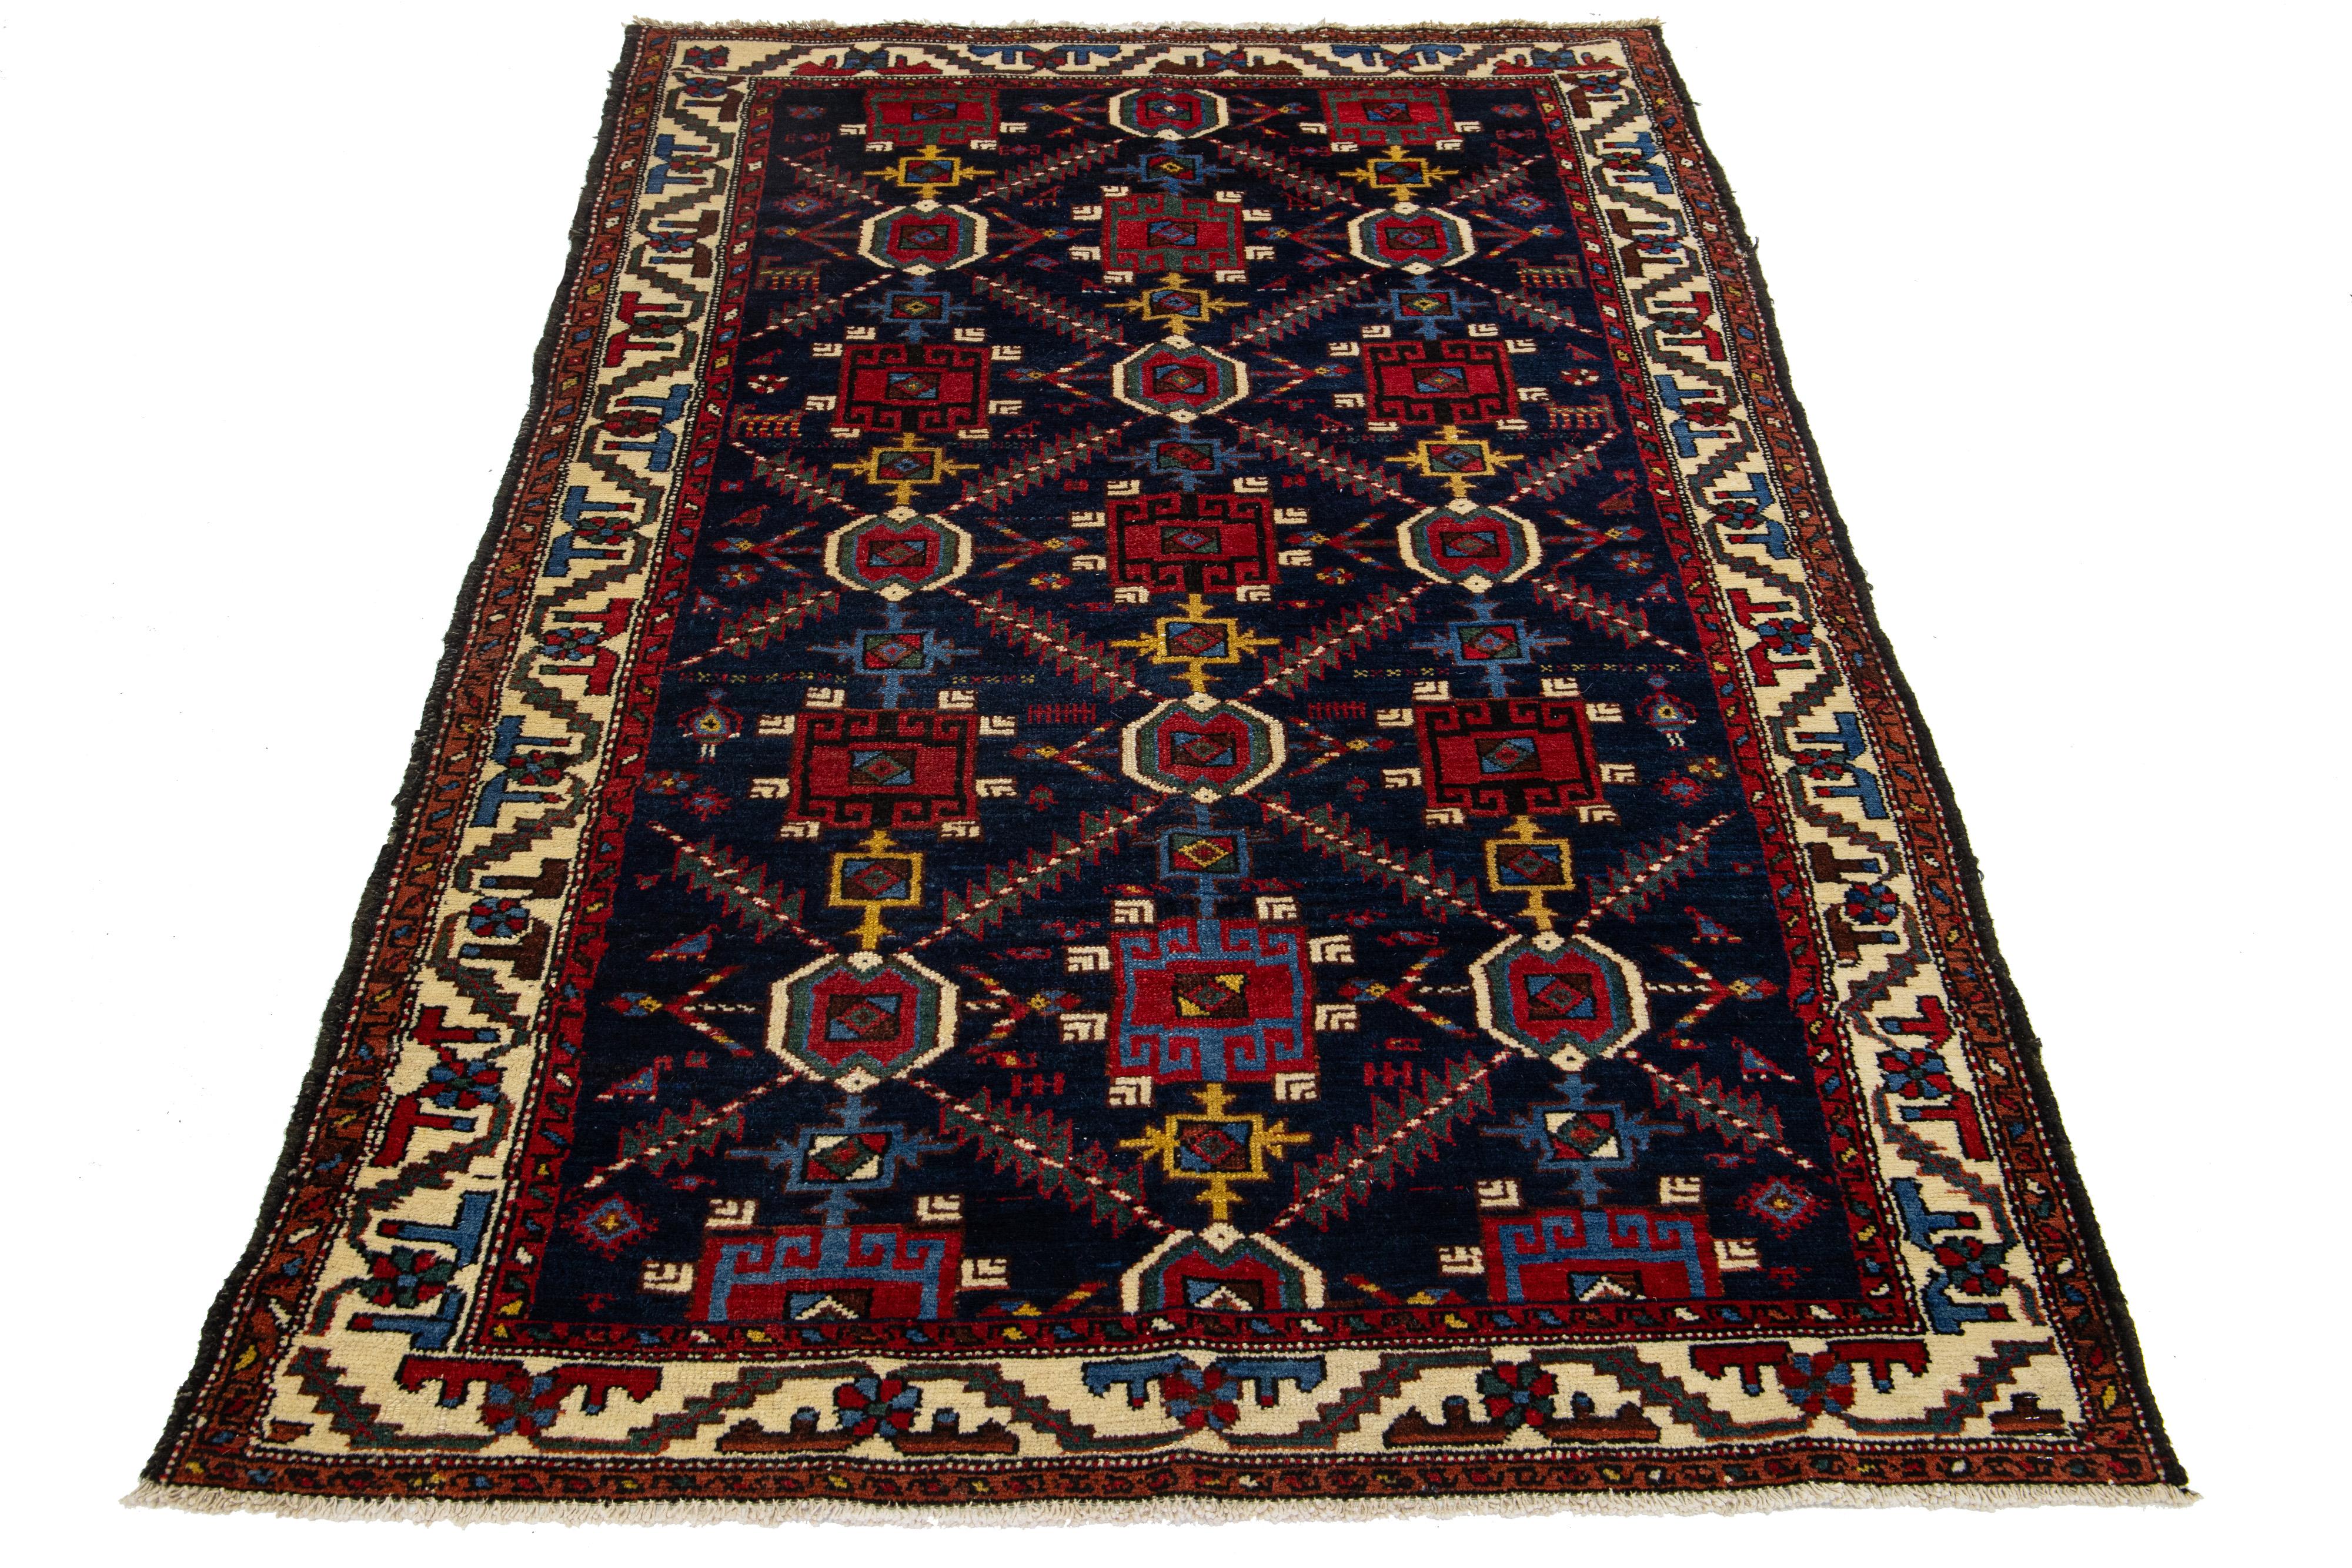 This elegant Antique Bakhtiari hand-knotted wool rug showcases a navy blue color field. It displays a timeless Persian design with yellow, beige, and red accents.

This rug measures 4'3